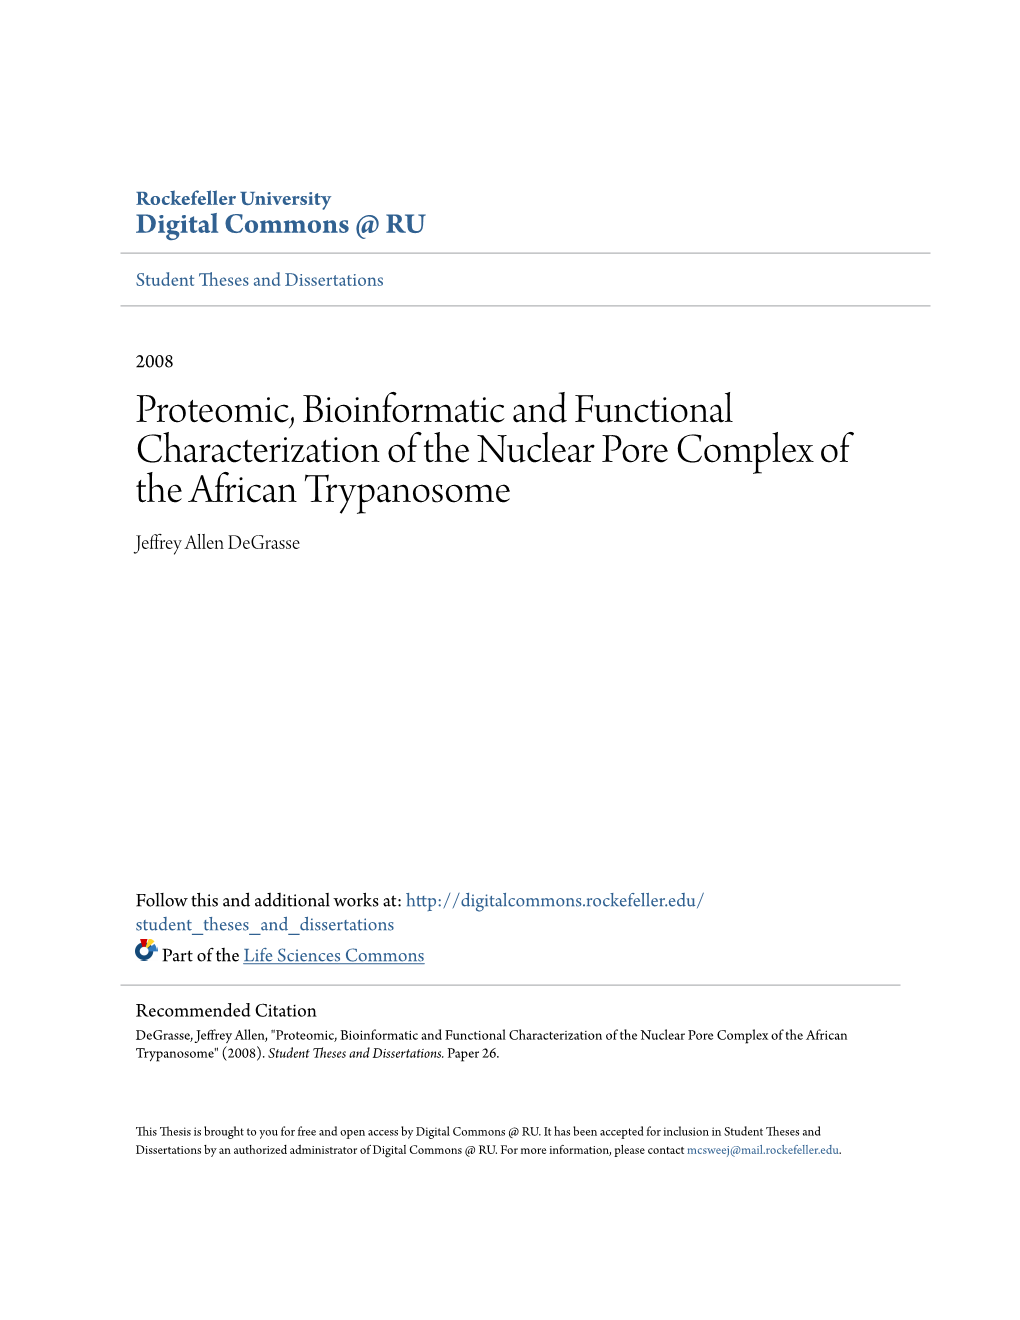 Proteomic, Bioinformatic and Functional Characterization of the Nuclear Pore Complex of the African Trypanosome Jeffrey Allen Degrasse